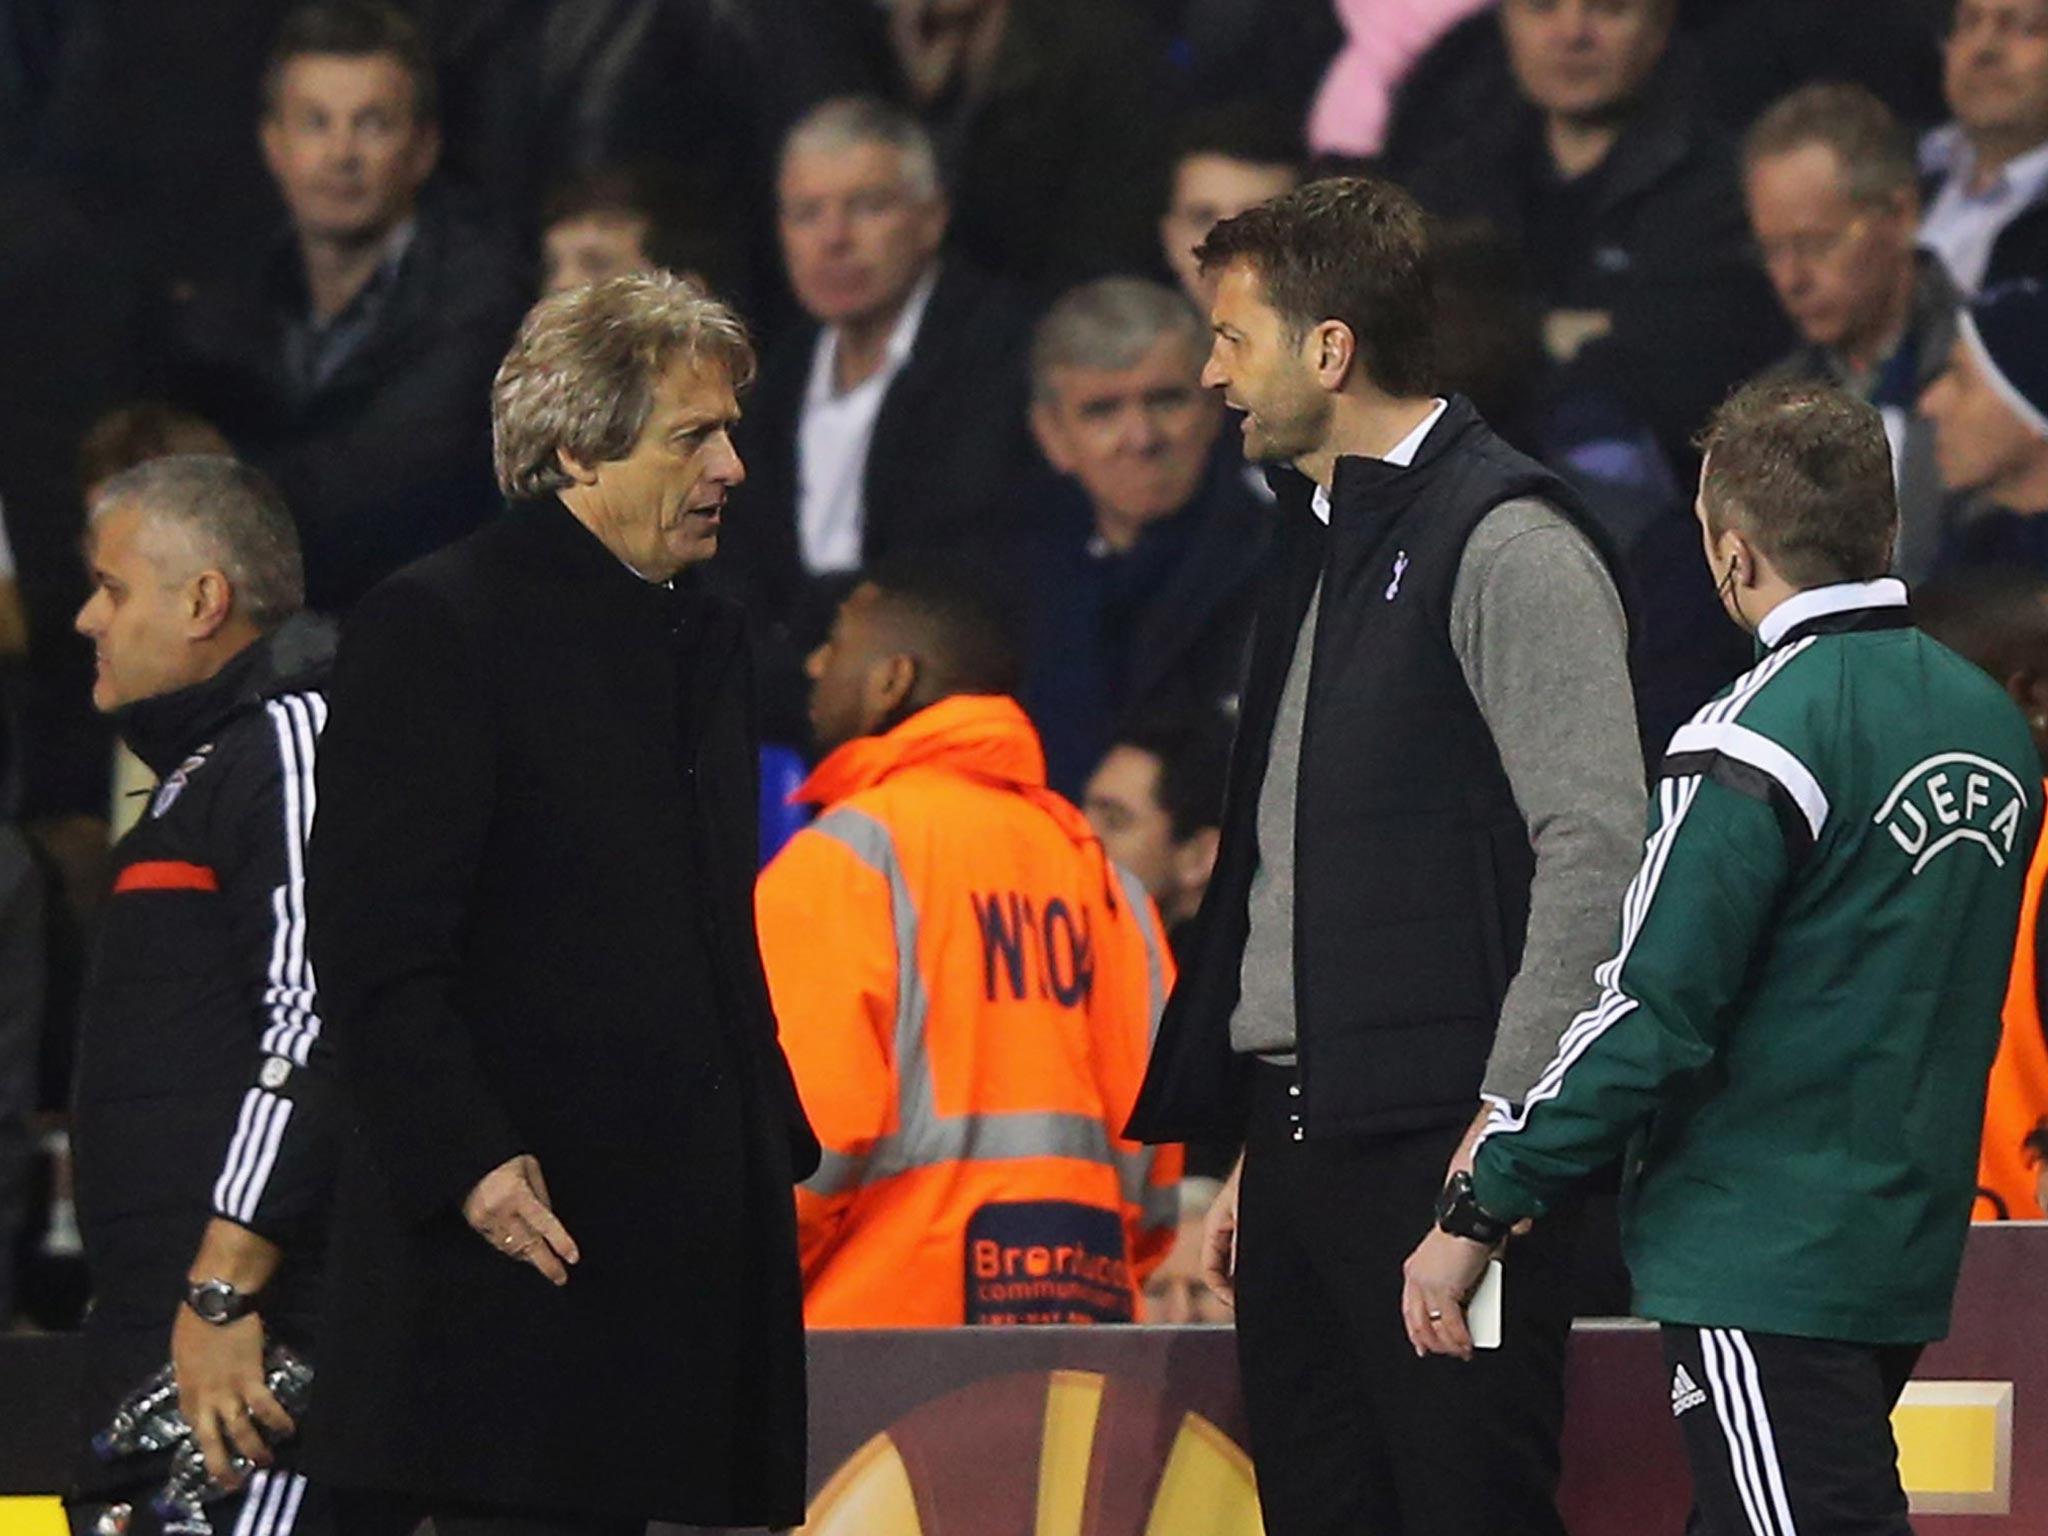 Tim Sherwood manager of Tottenham Hotspur argues with Jorge Jesus manager of Benfica during the match